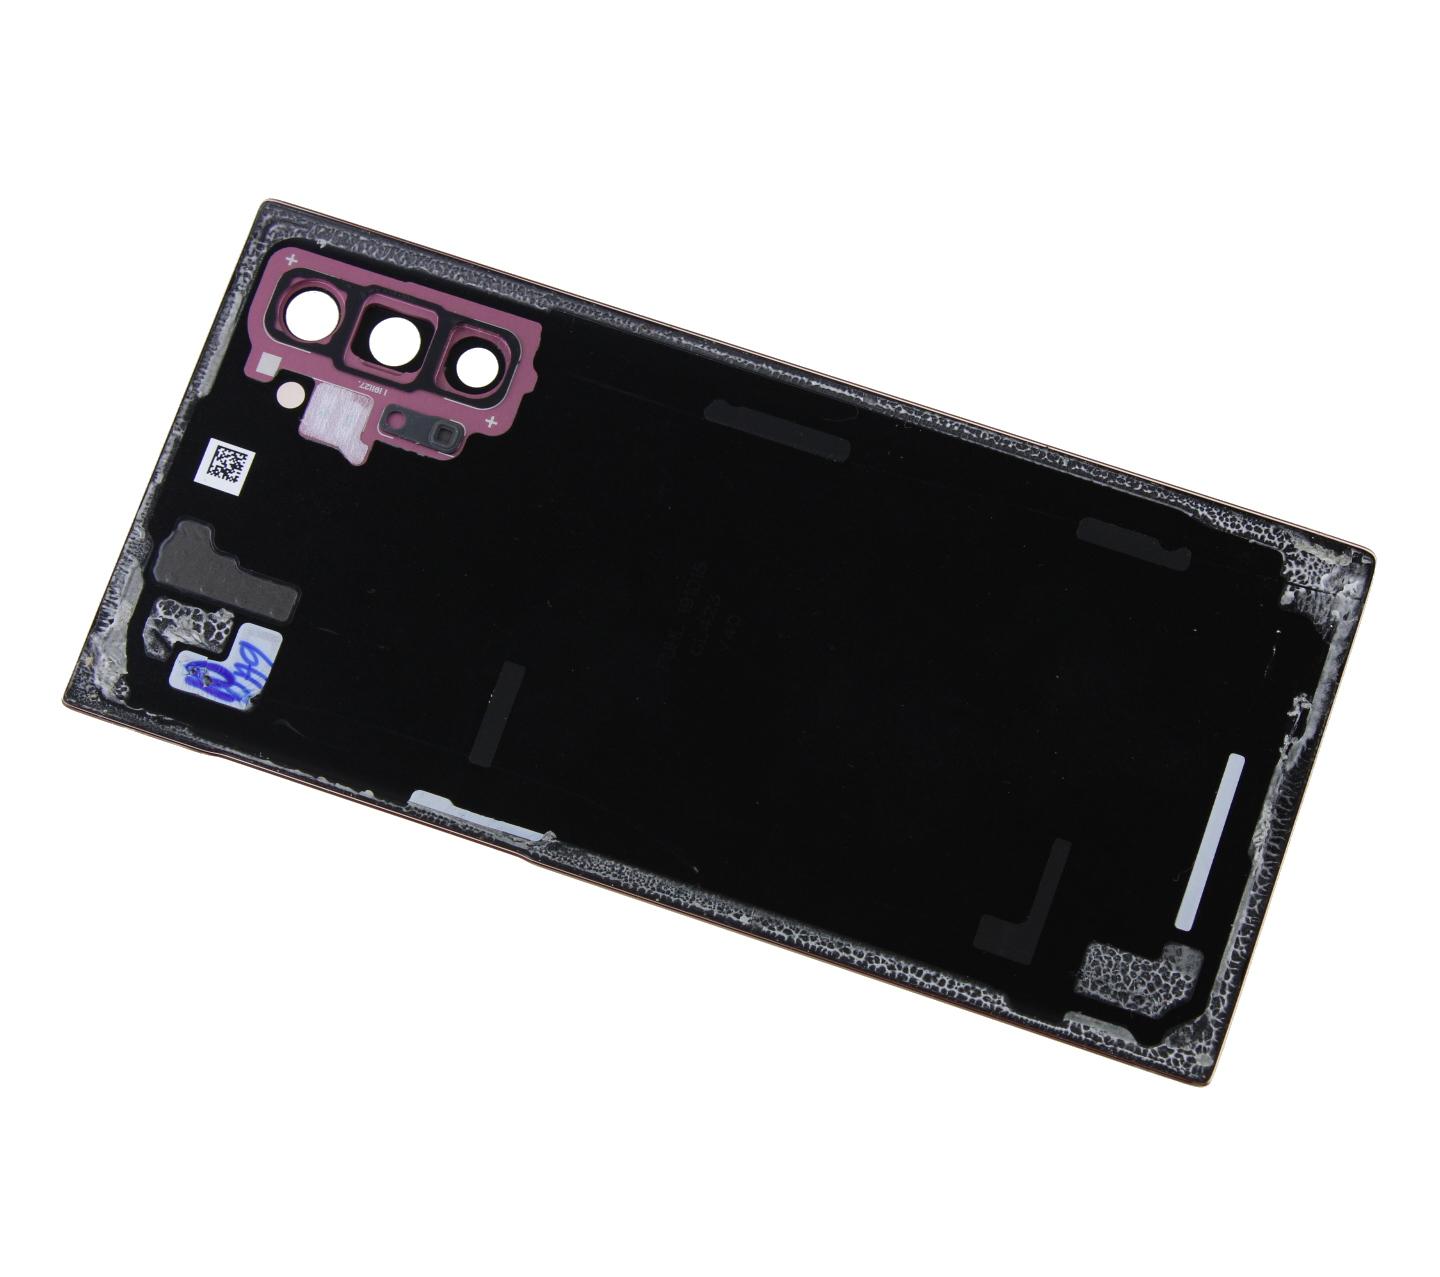 Original Battery cover Samsung SM-N970 Galaxy Note 10 - Pink (Disassembly) Grade A